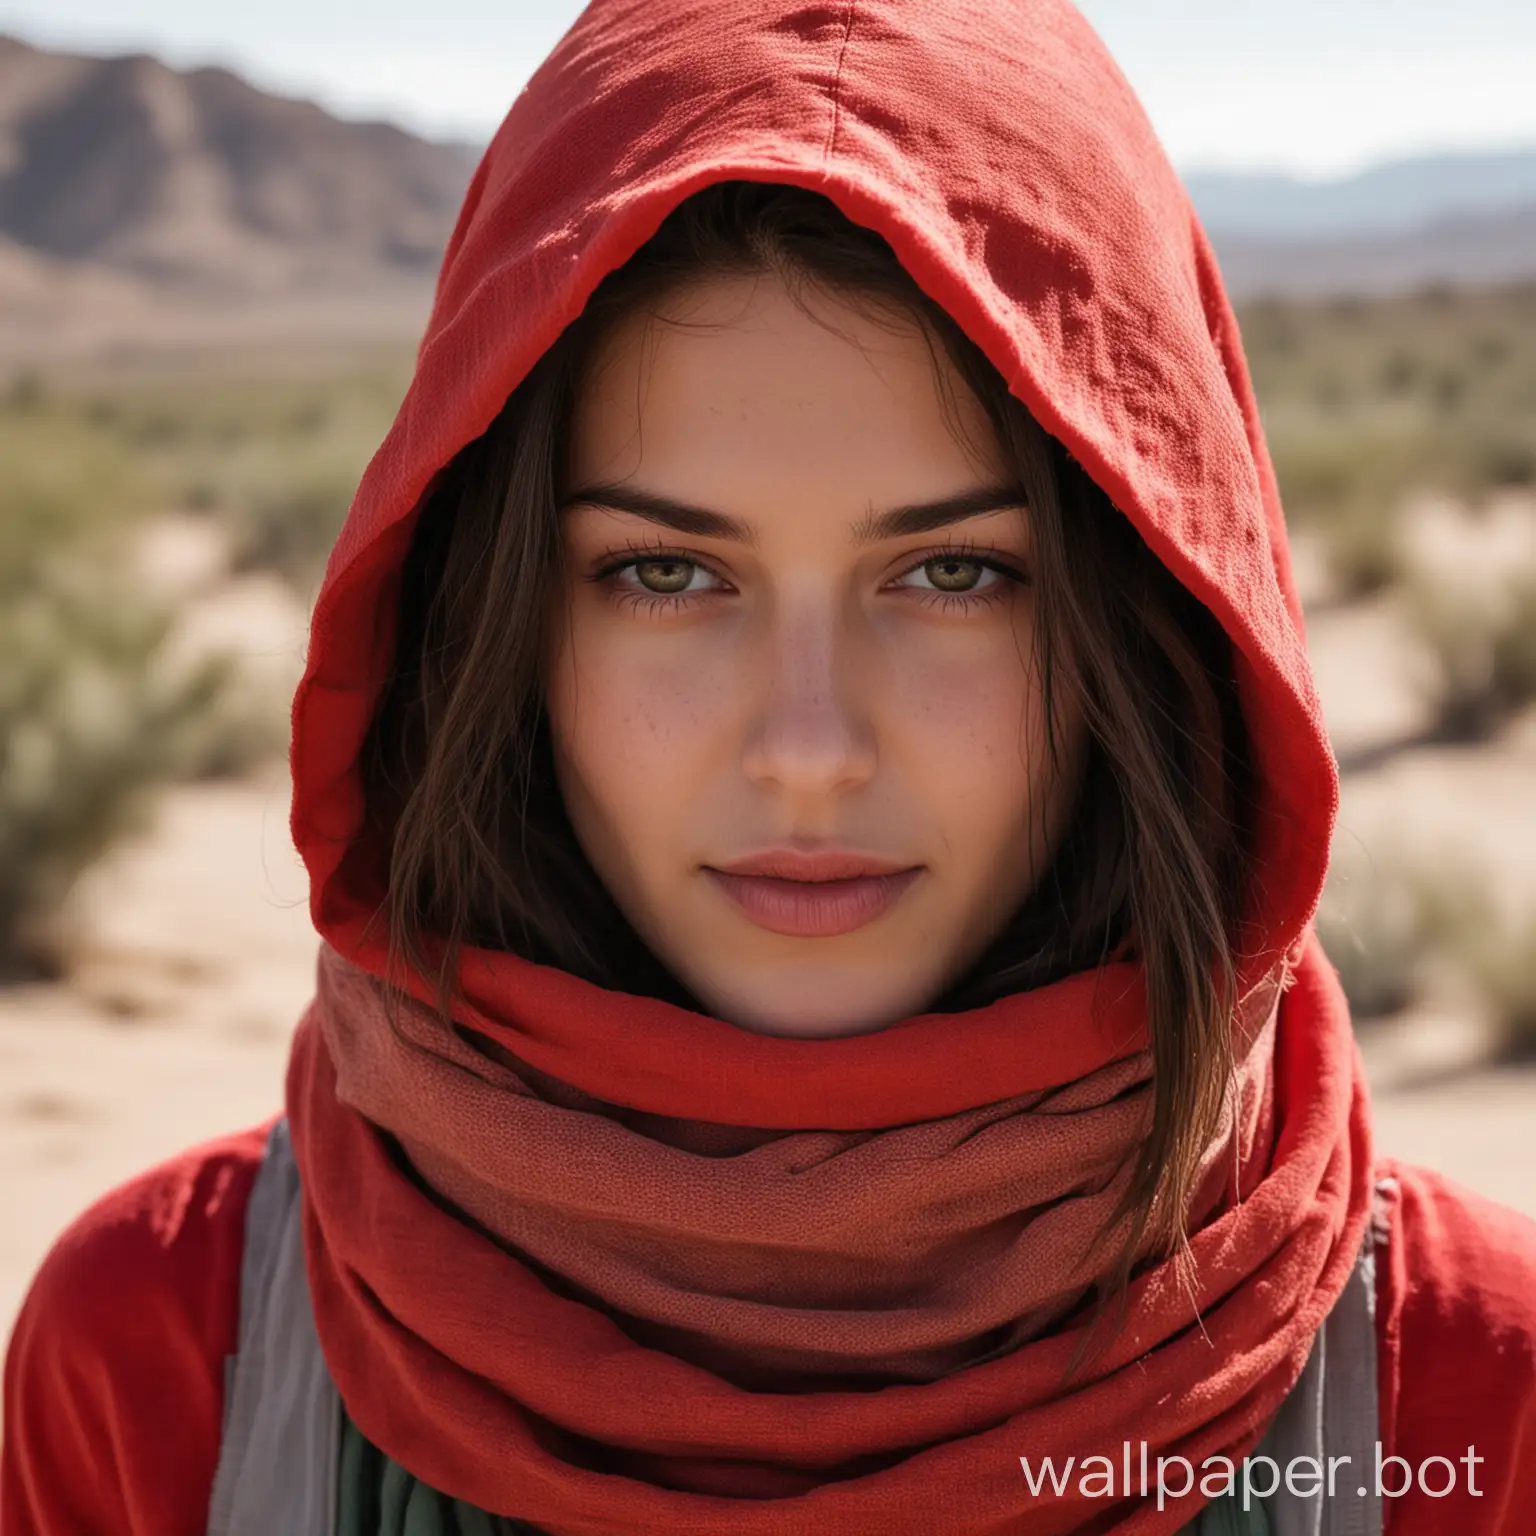 Brunette-Girl-with-Faded-Green-Scarf-and-Weathered-Red-Hood-in-Desert-CloseUp